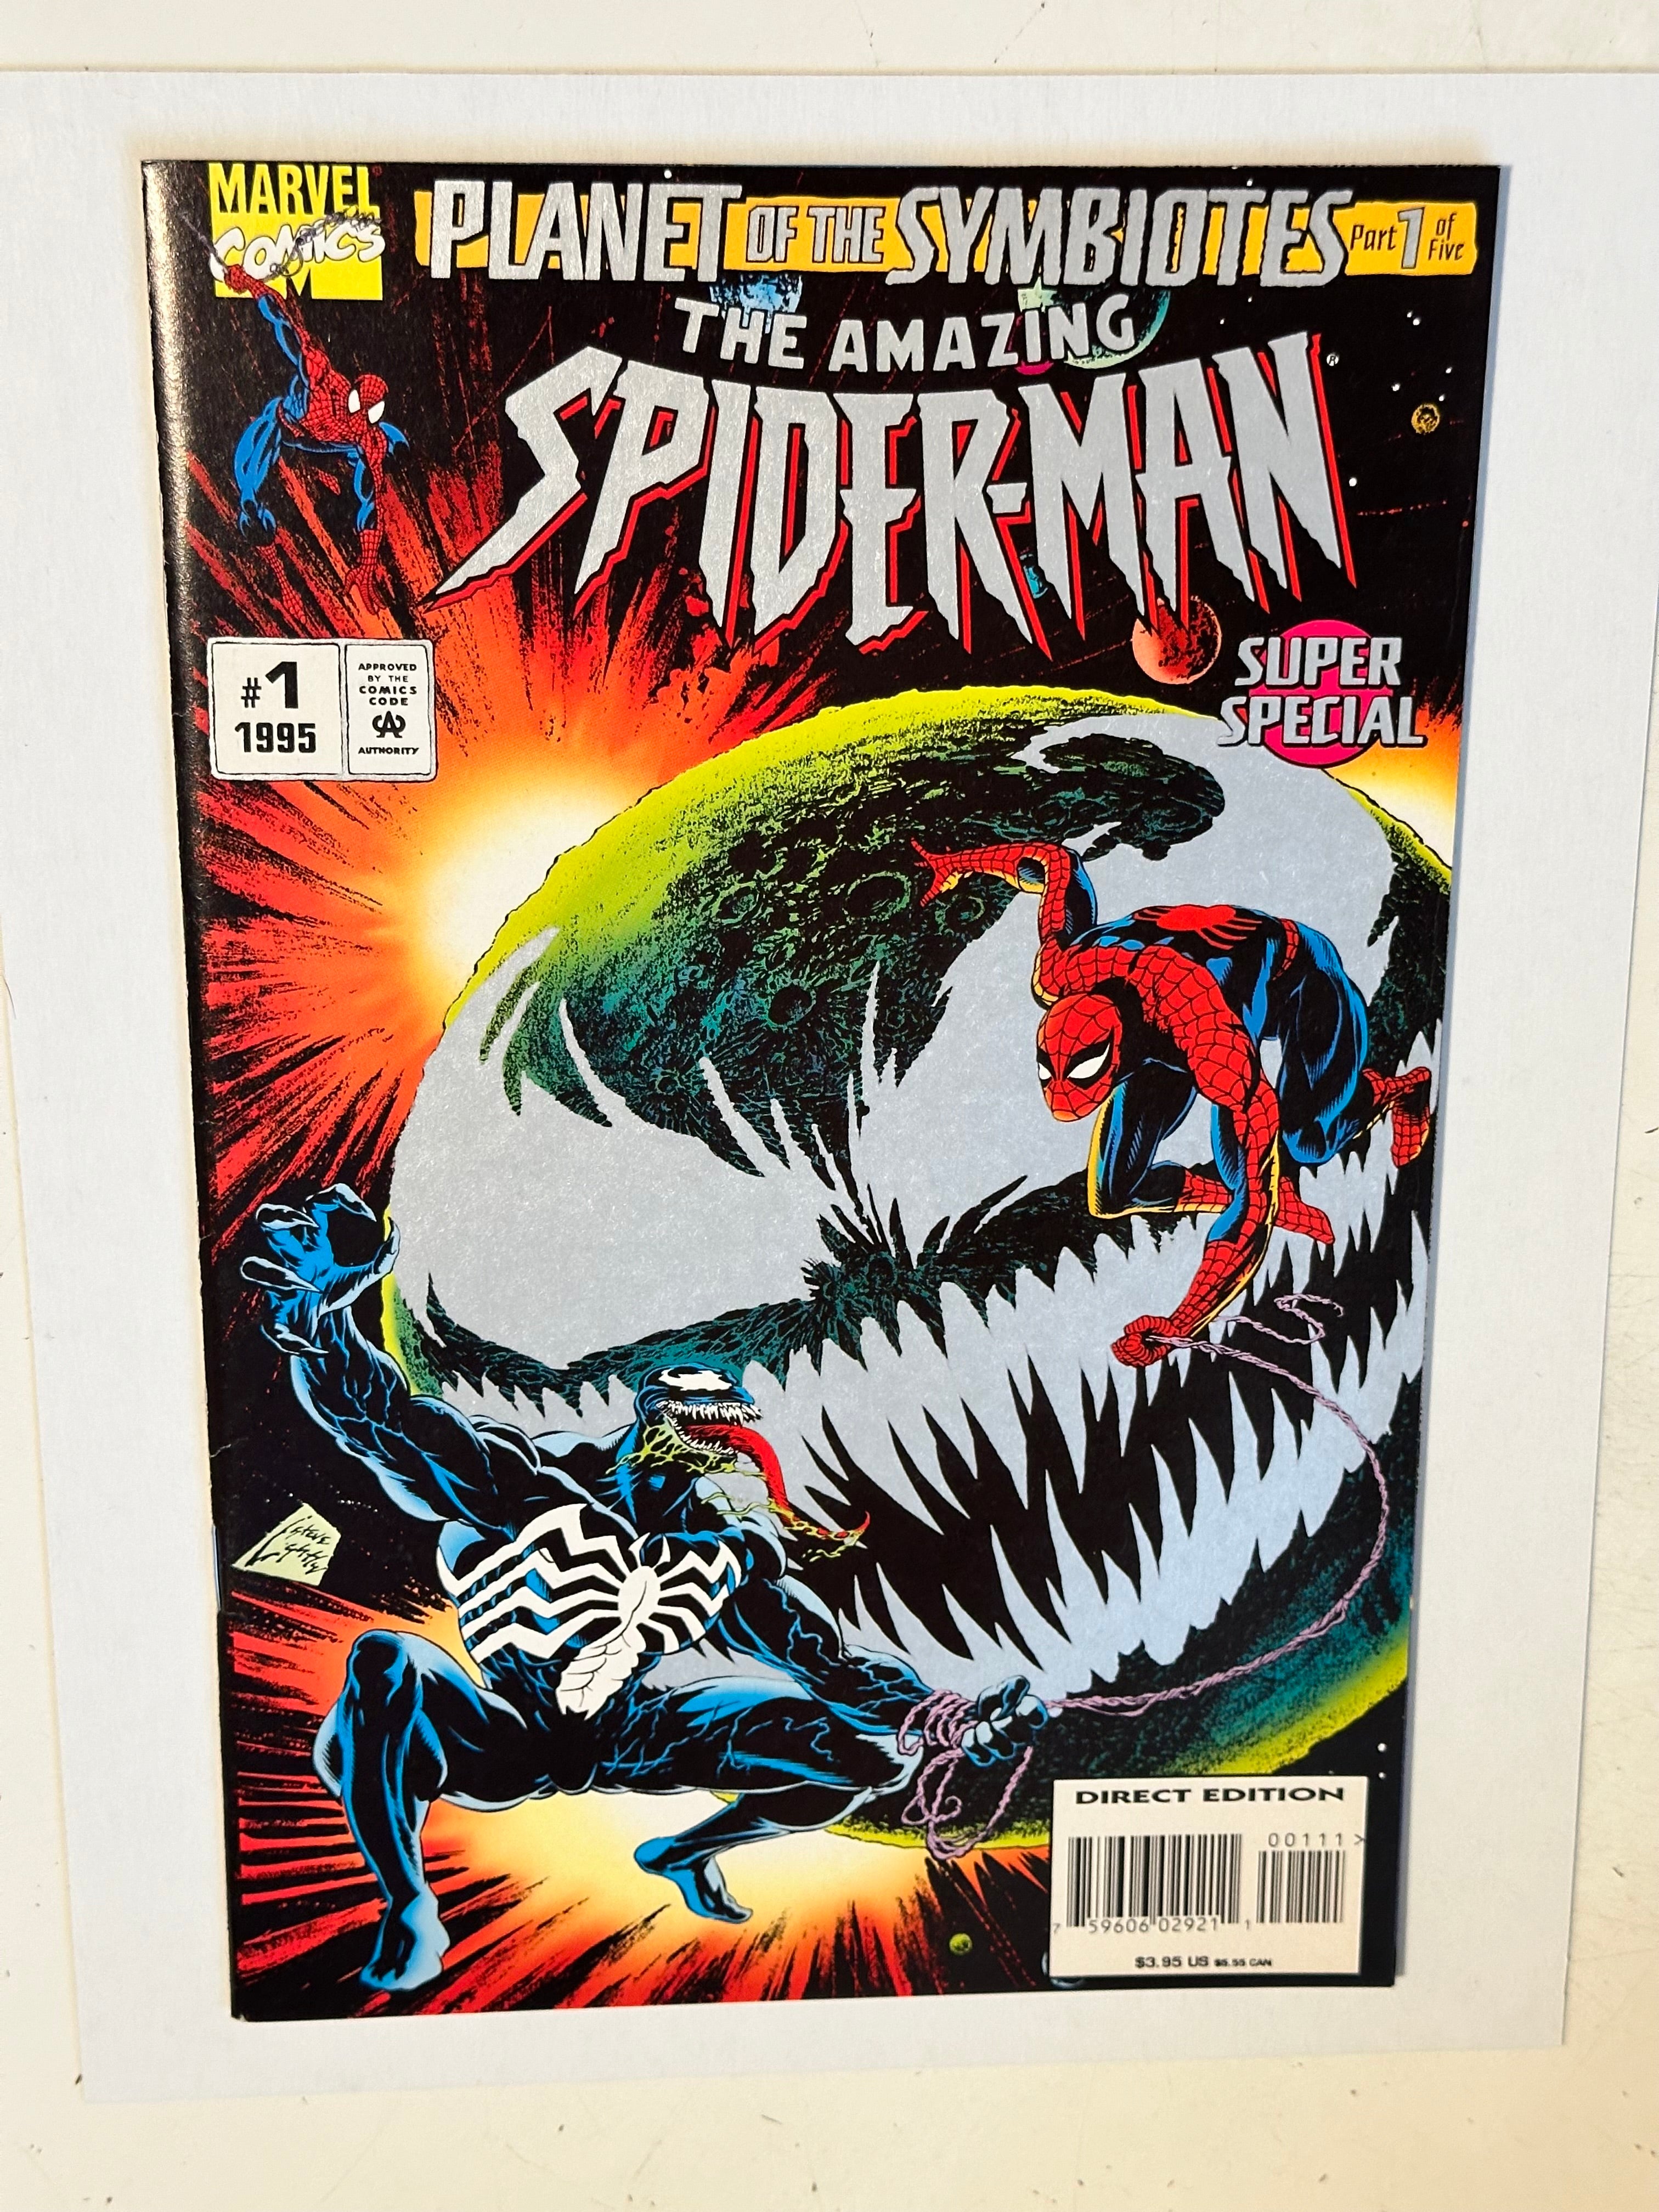 Amazing Spider-Man super special number one plan of the symbiots two cover comic.